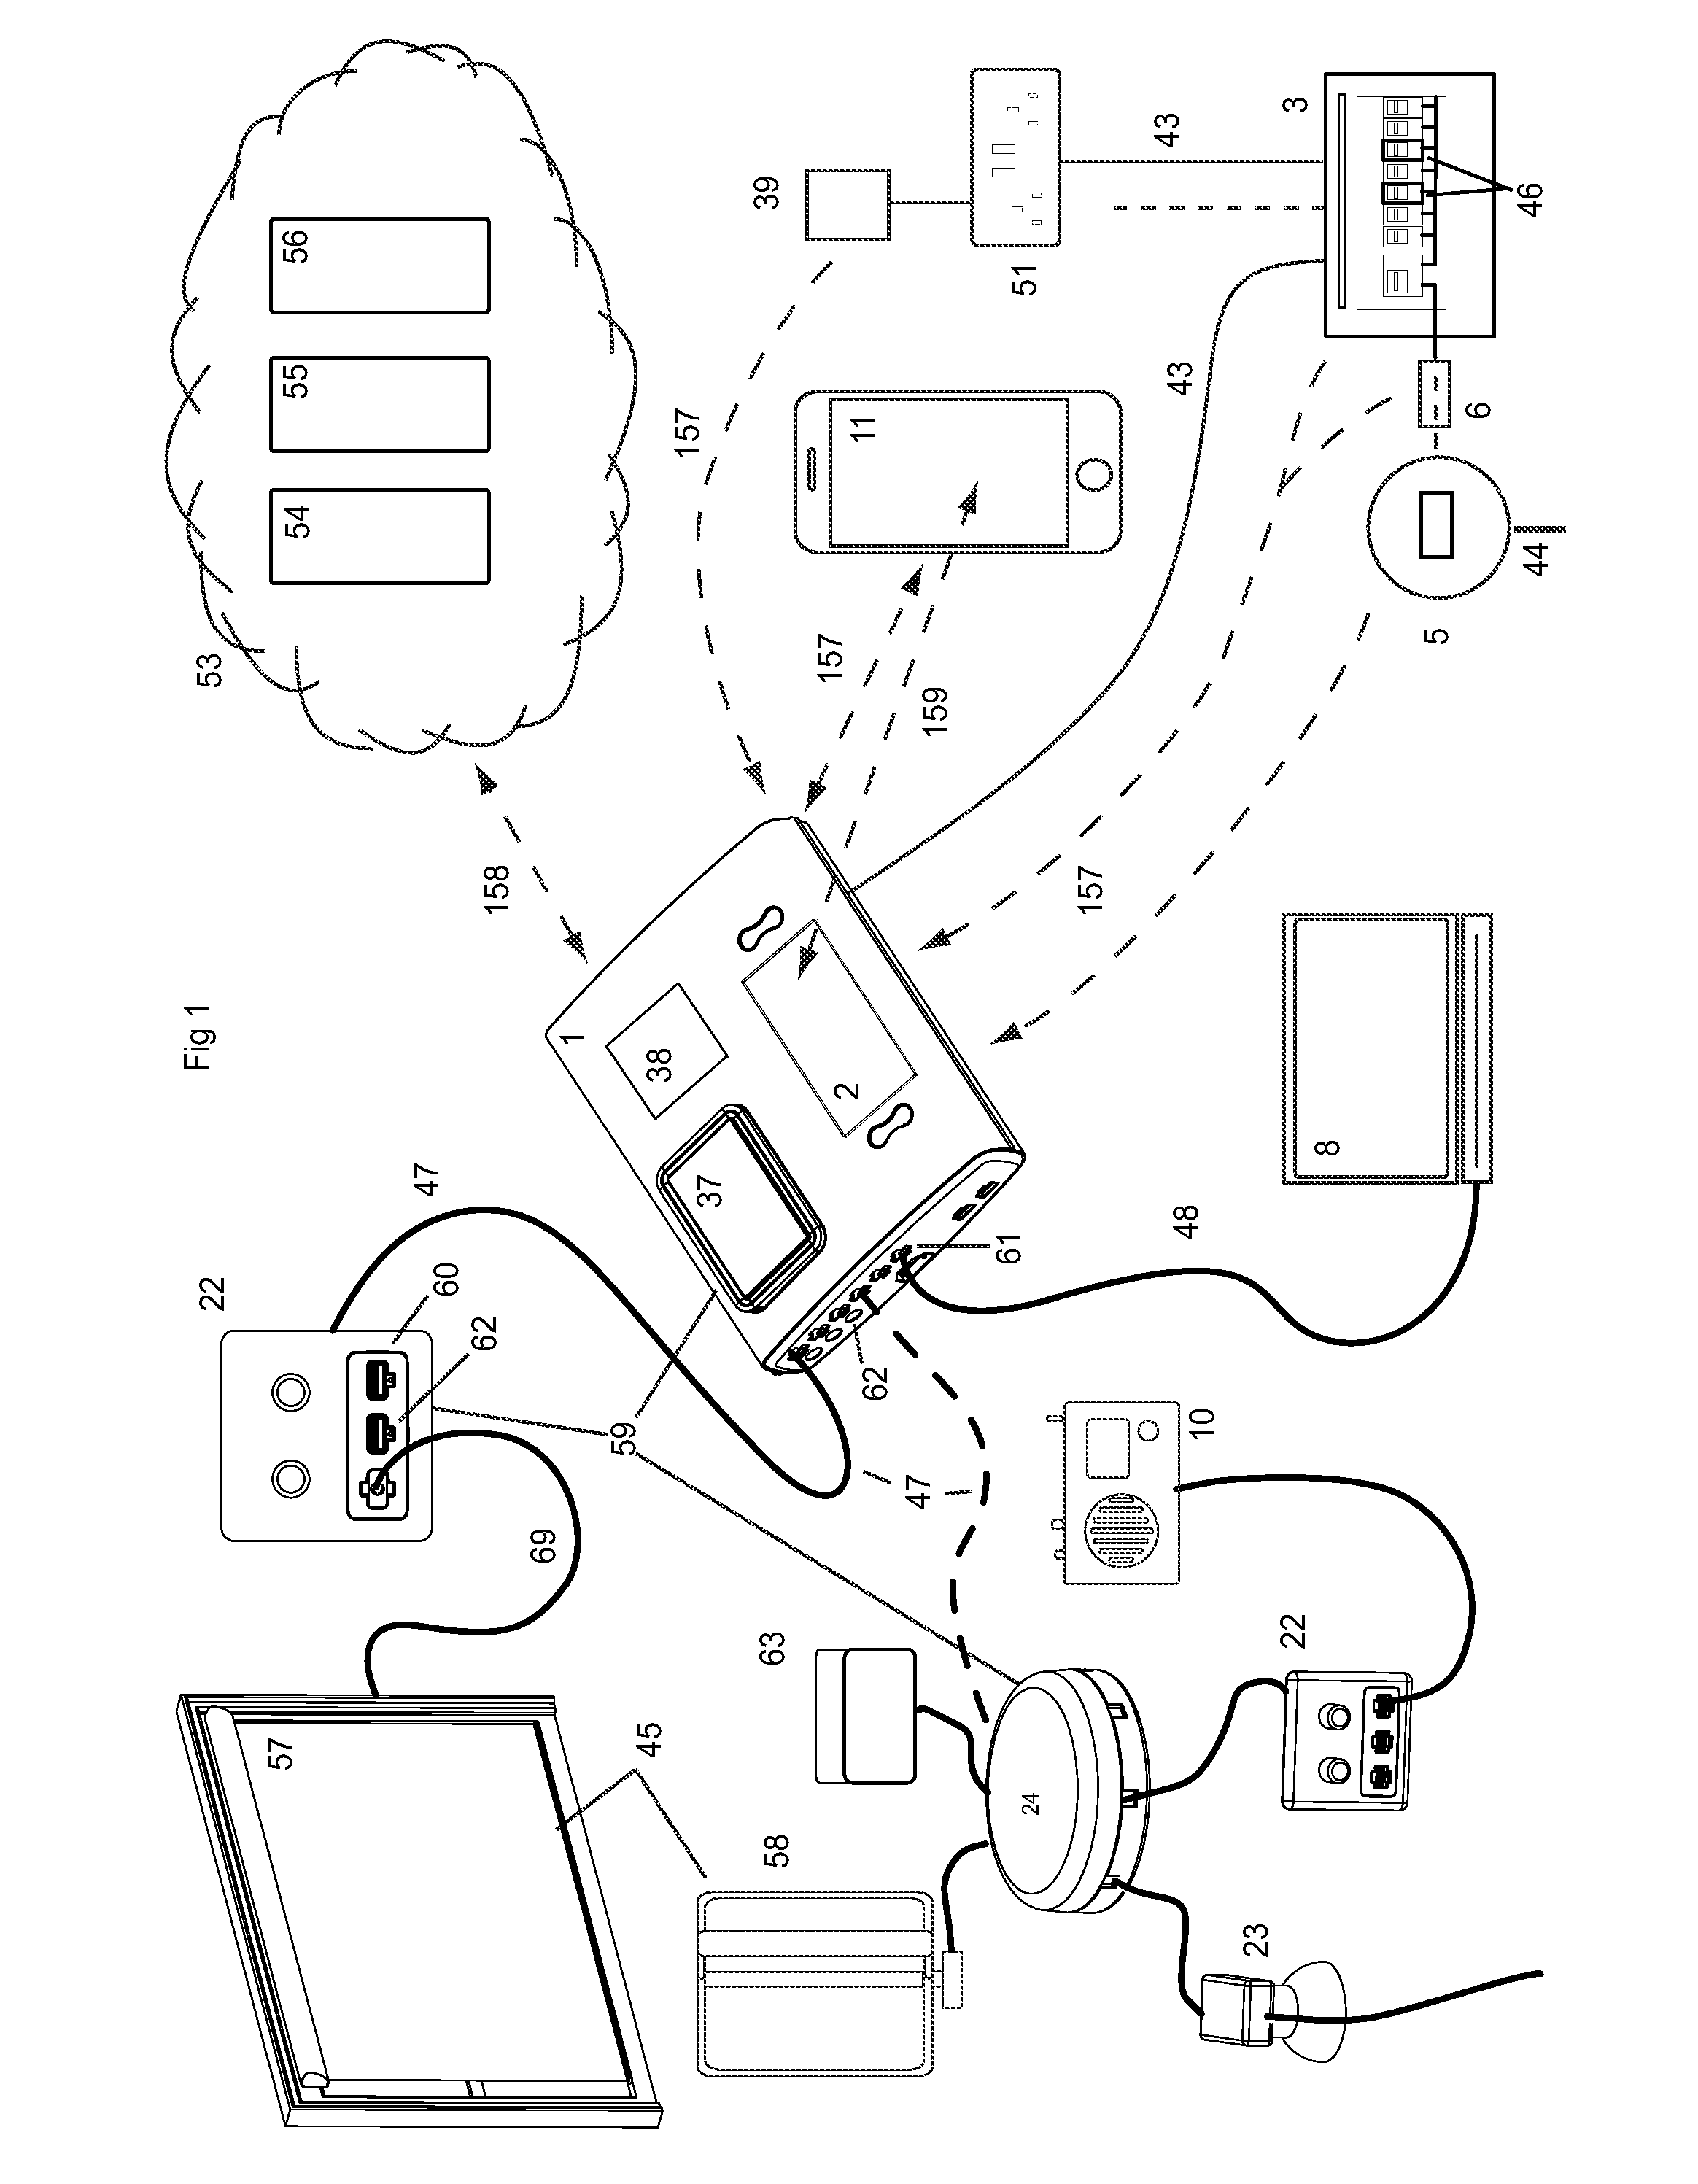 Systems, devices and methods for electricity provision, usage monitoring, analysis, and enabling improvements in efficiency